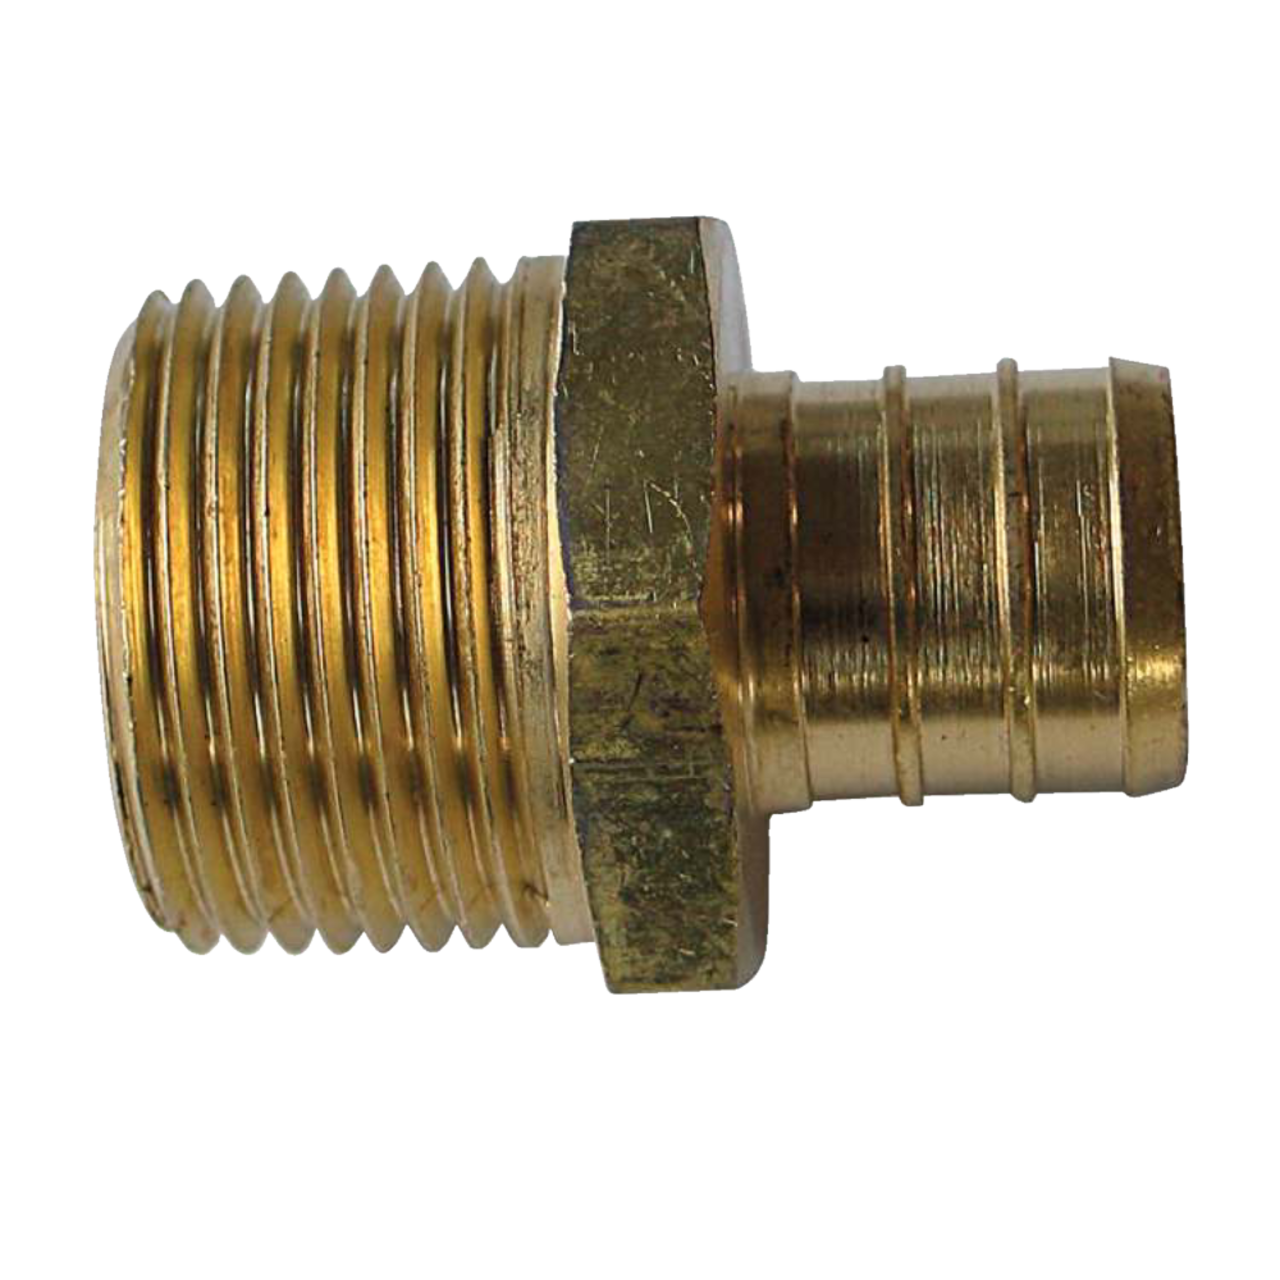 Waterline Solid Brass Male Pipe Adapter for PEX Pipe, 1/2 x 3/4-in